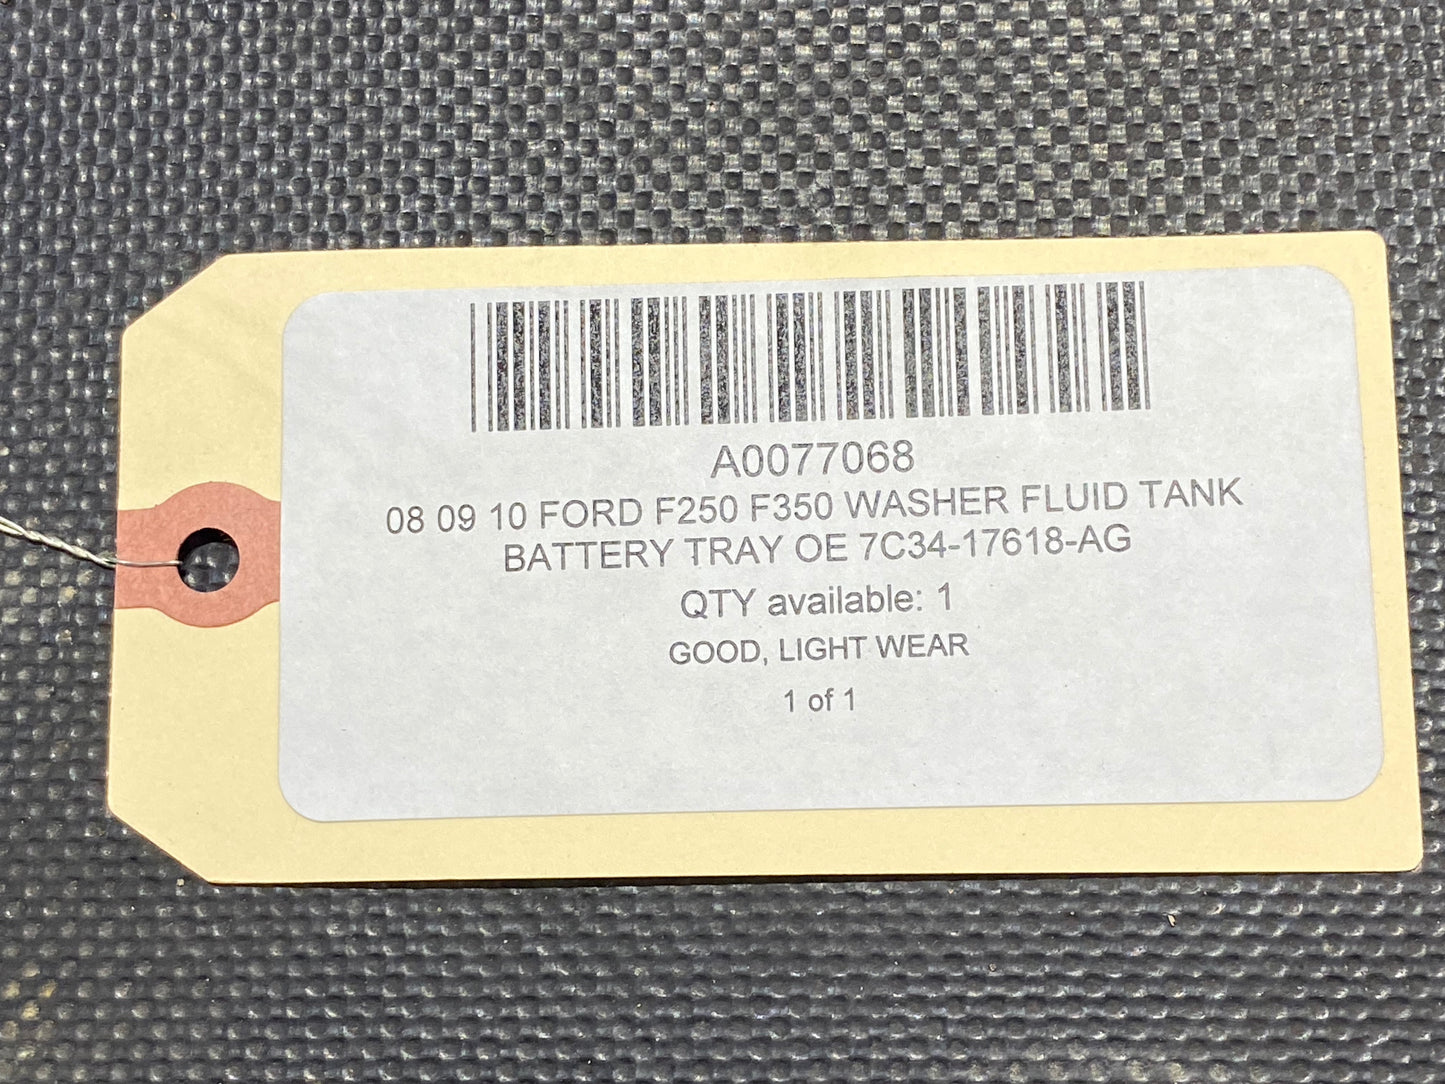 08 09 10 Ford F250 F350 Washer Fluid Tank Battery Tray OE 7C34-17618-AG